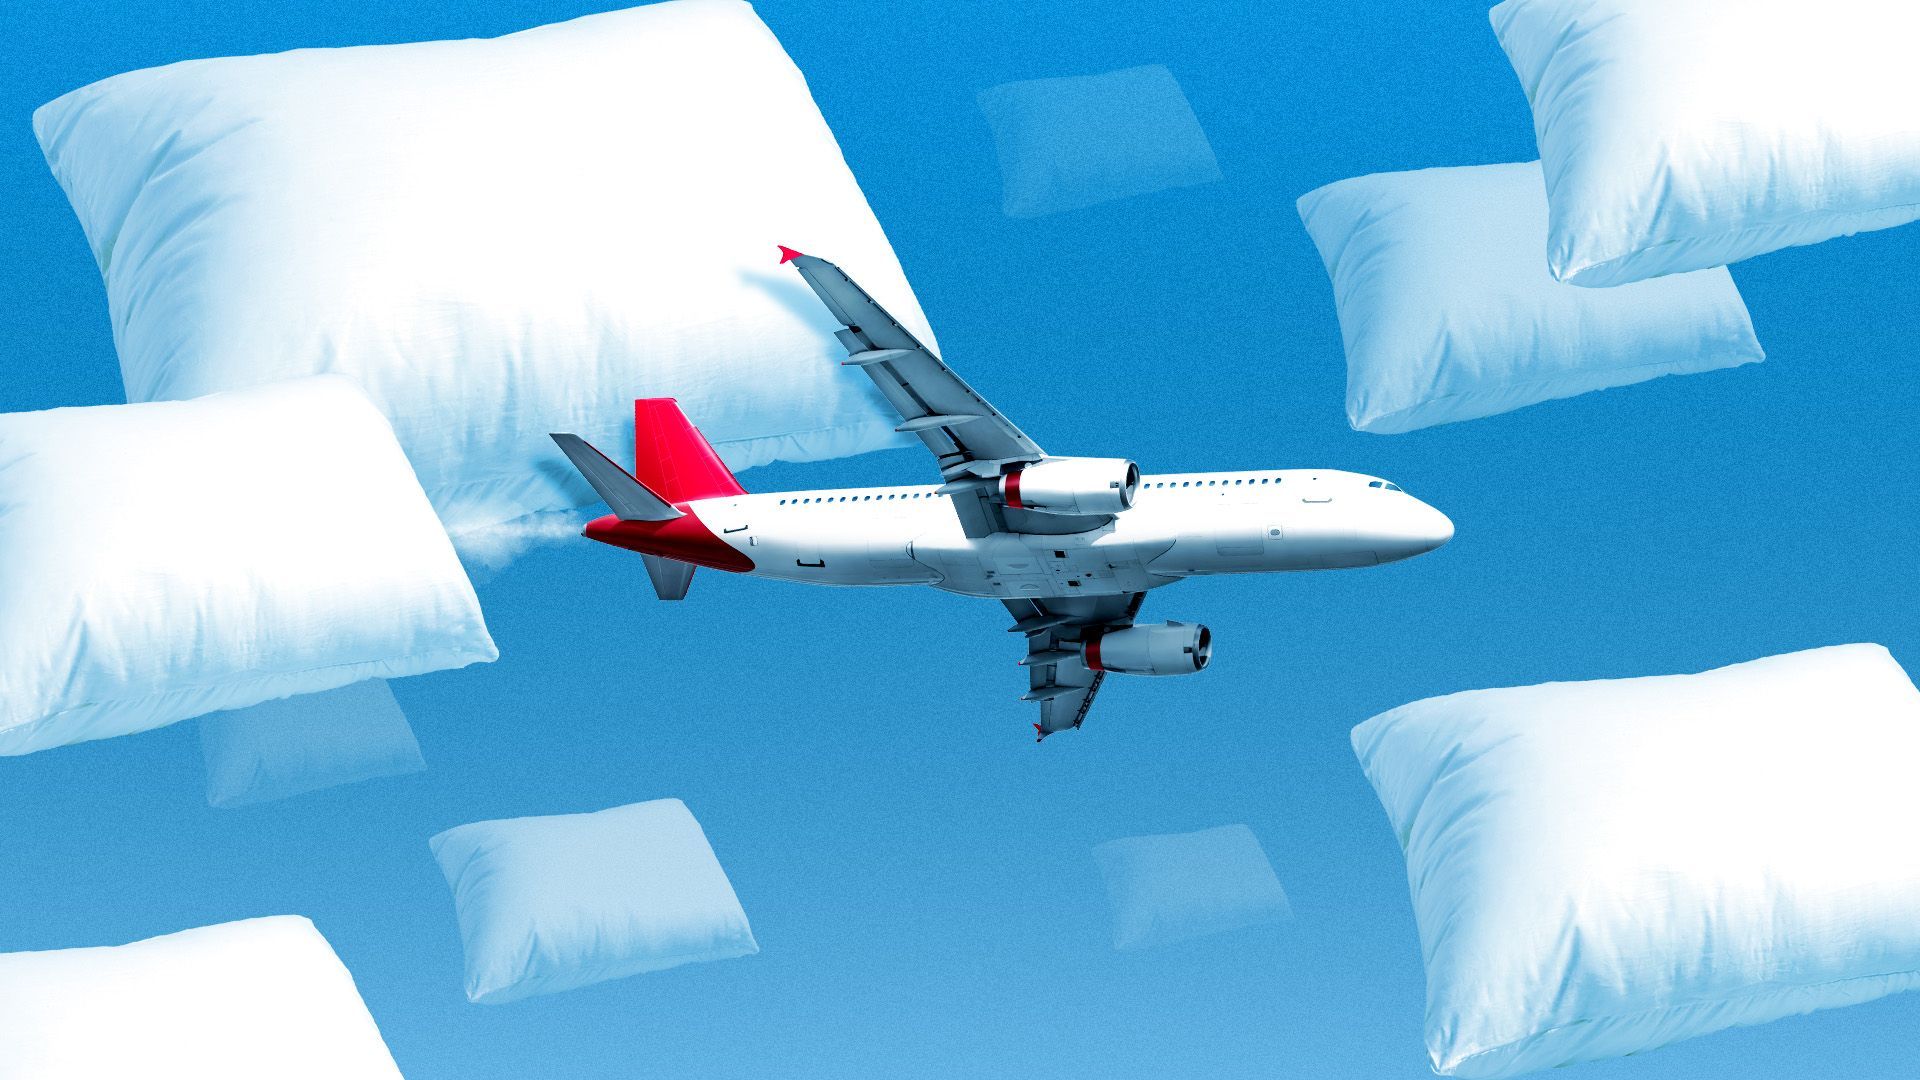 Illustration of an airplane flying through a series of pillow-shaped clouds